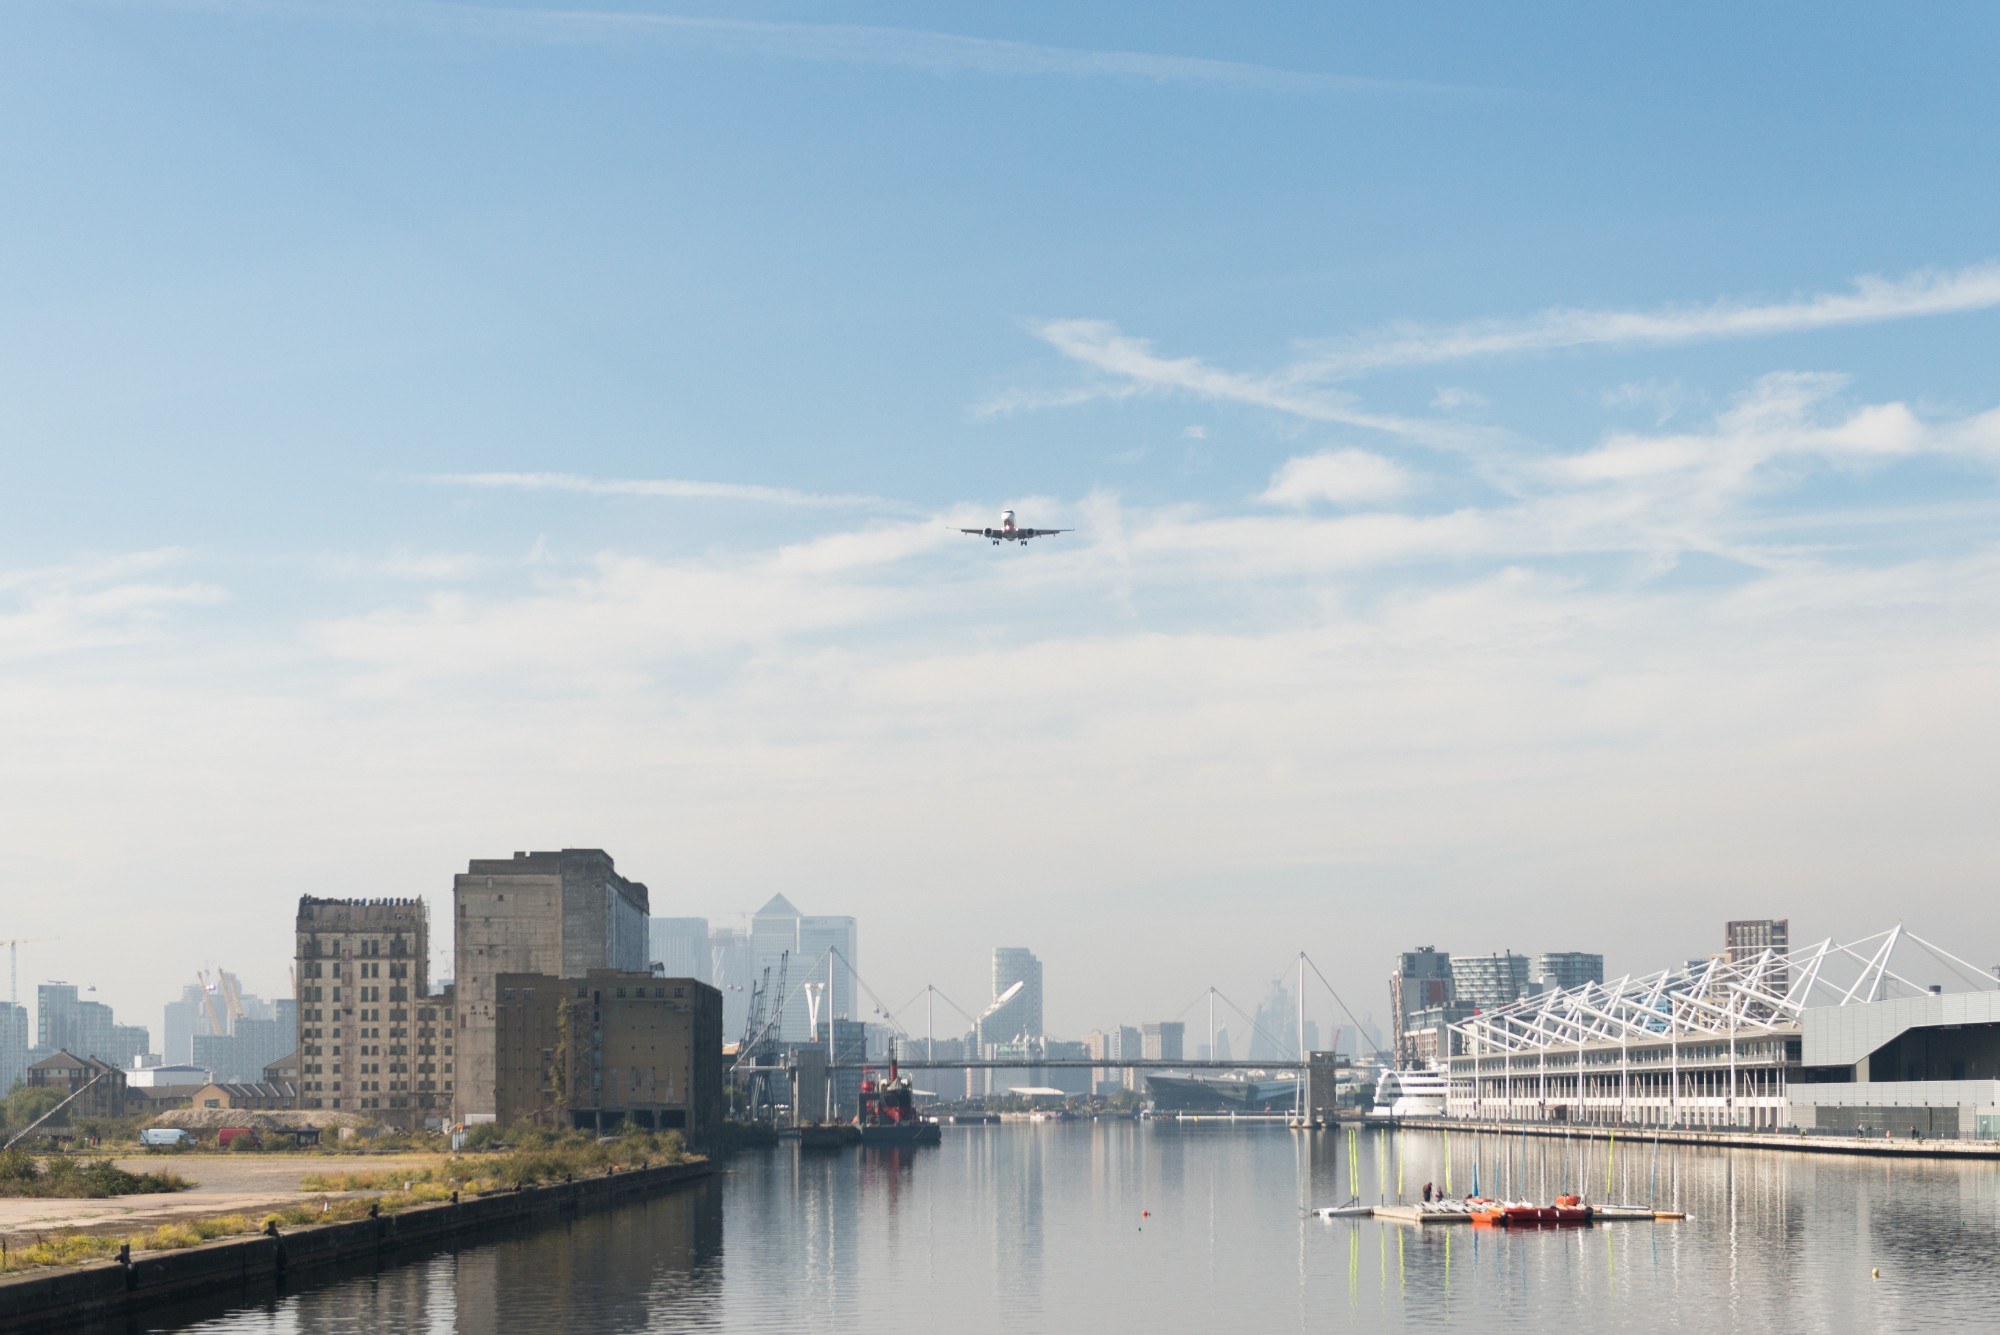 Plane in the sky having departed London City Airport with Canary Wharf in the background